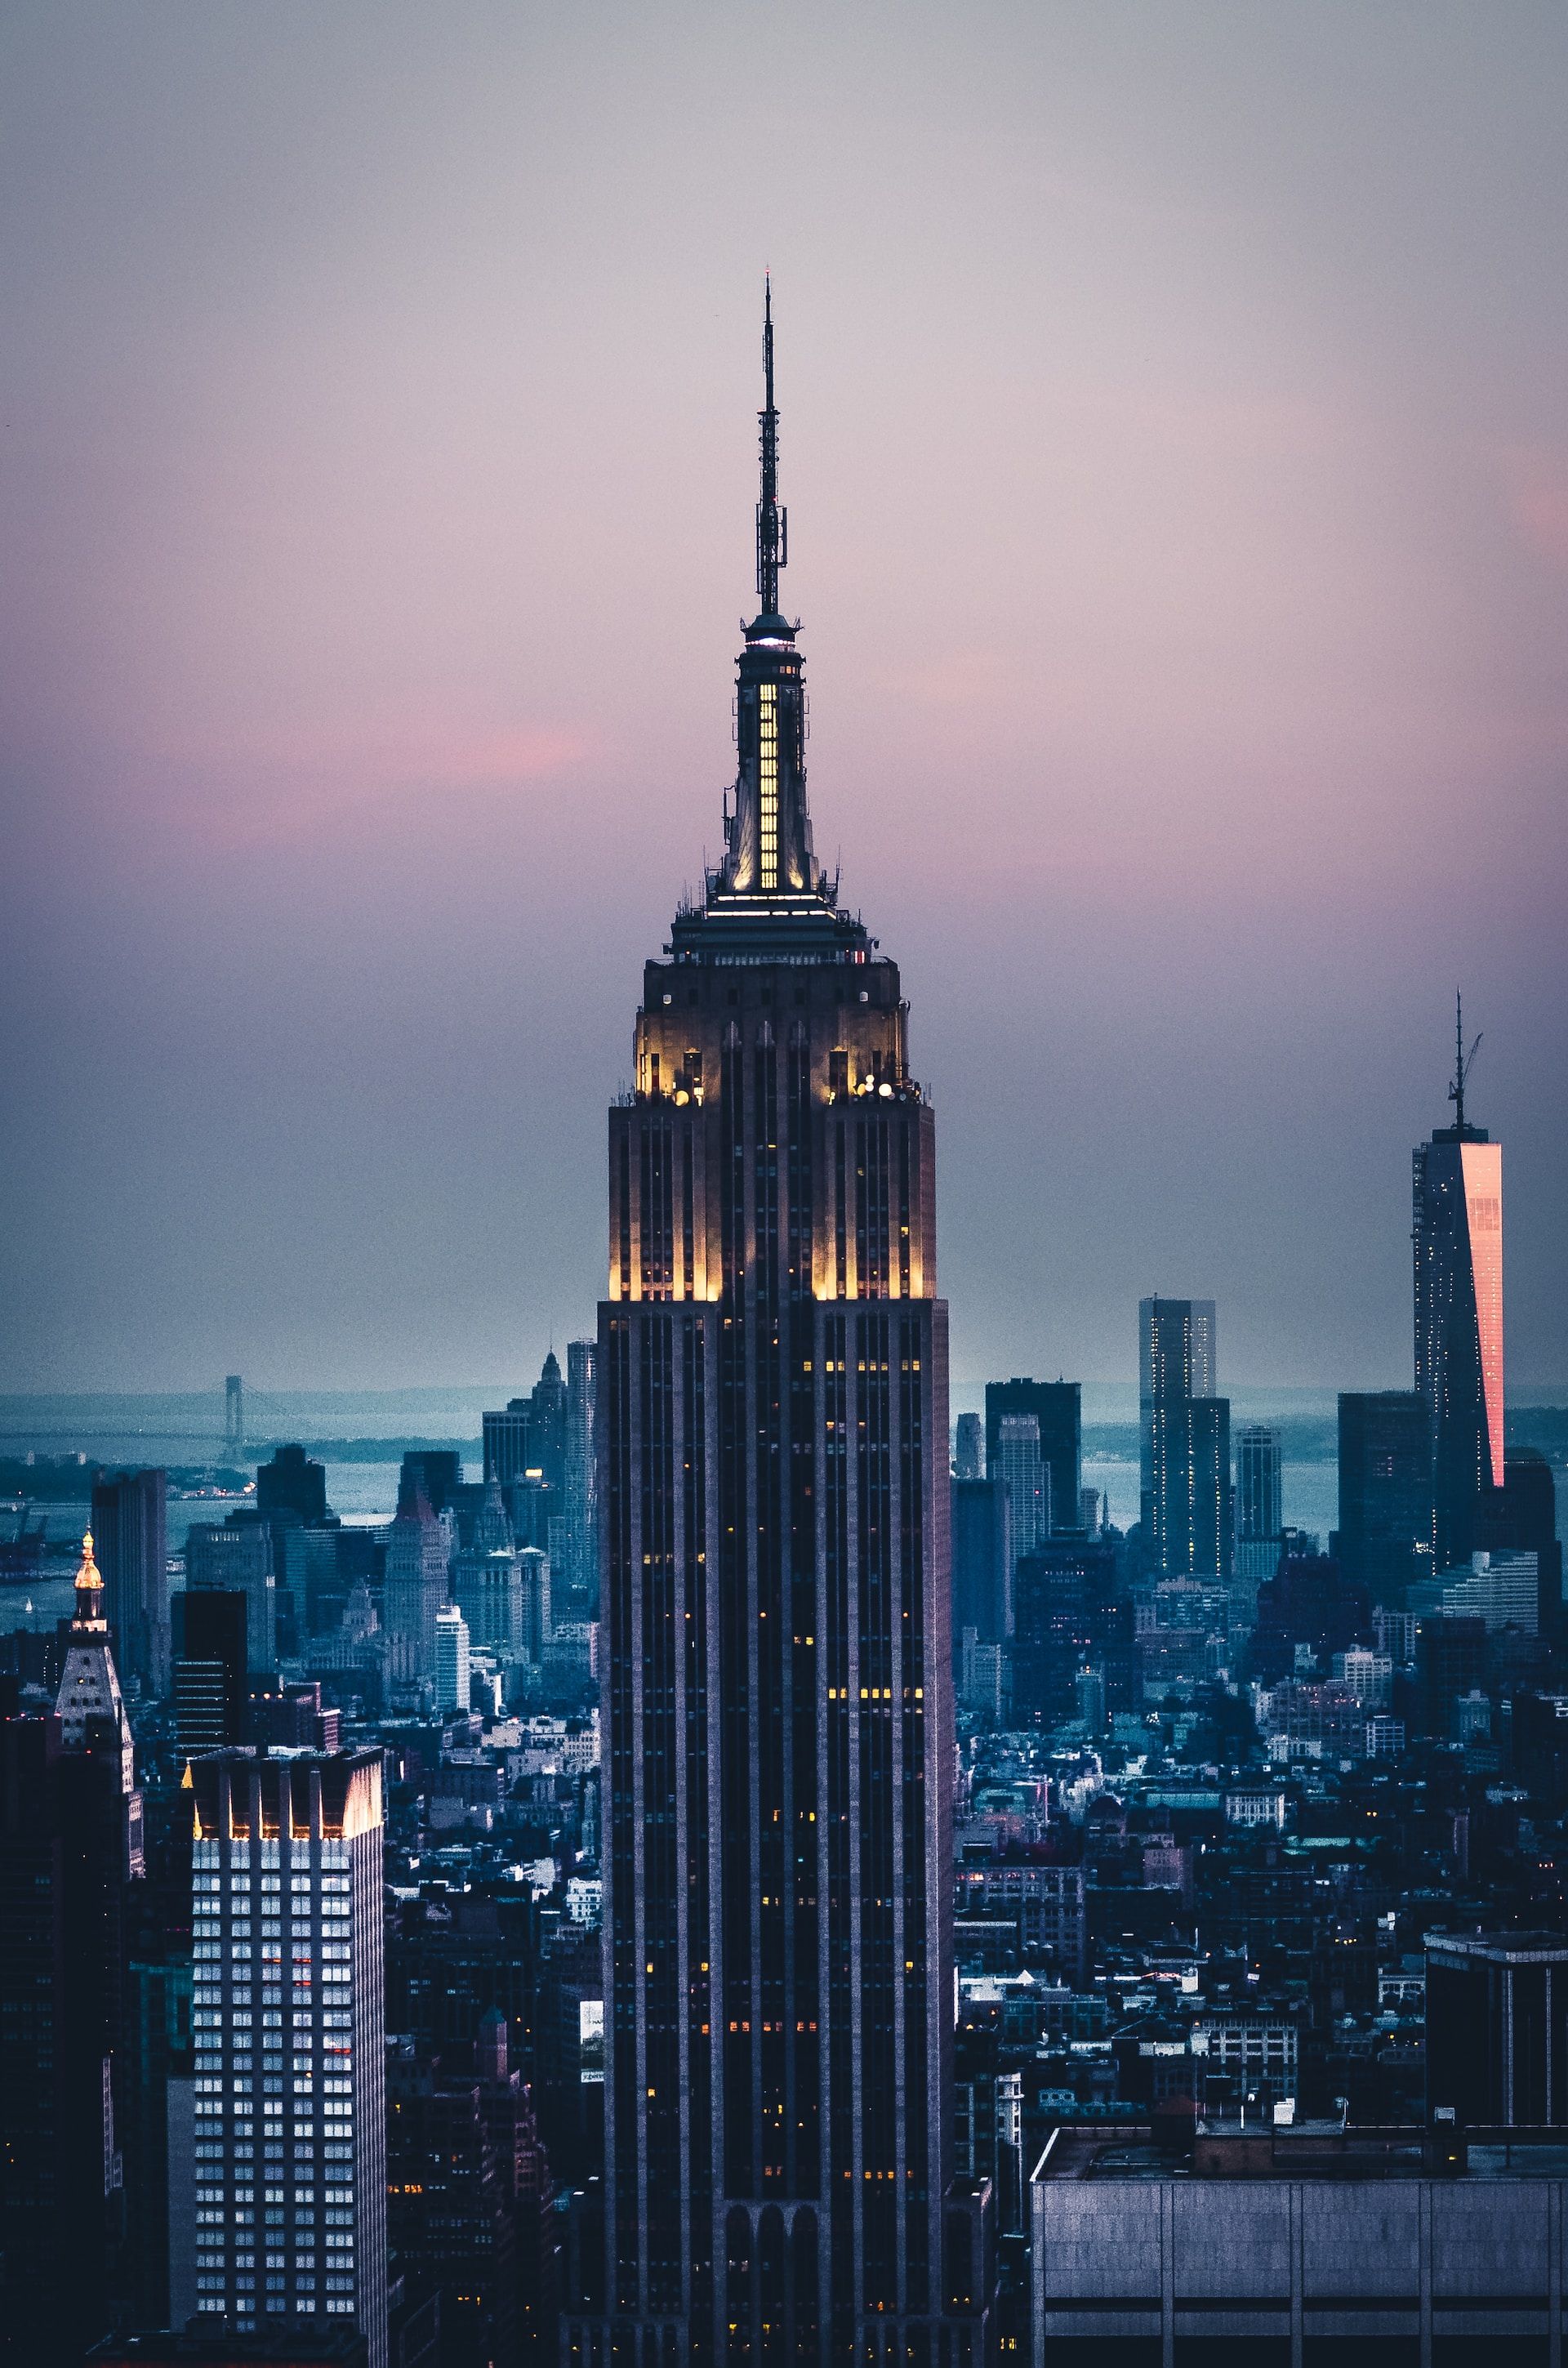 View of the Empire State Building at dusk in New York City